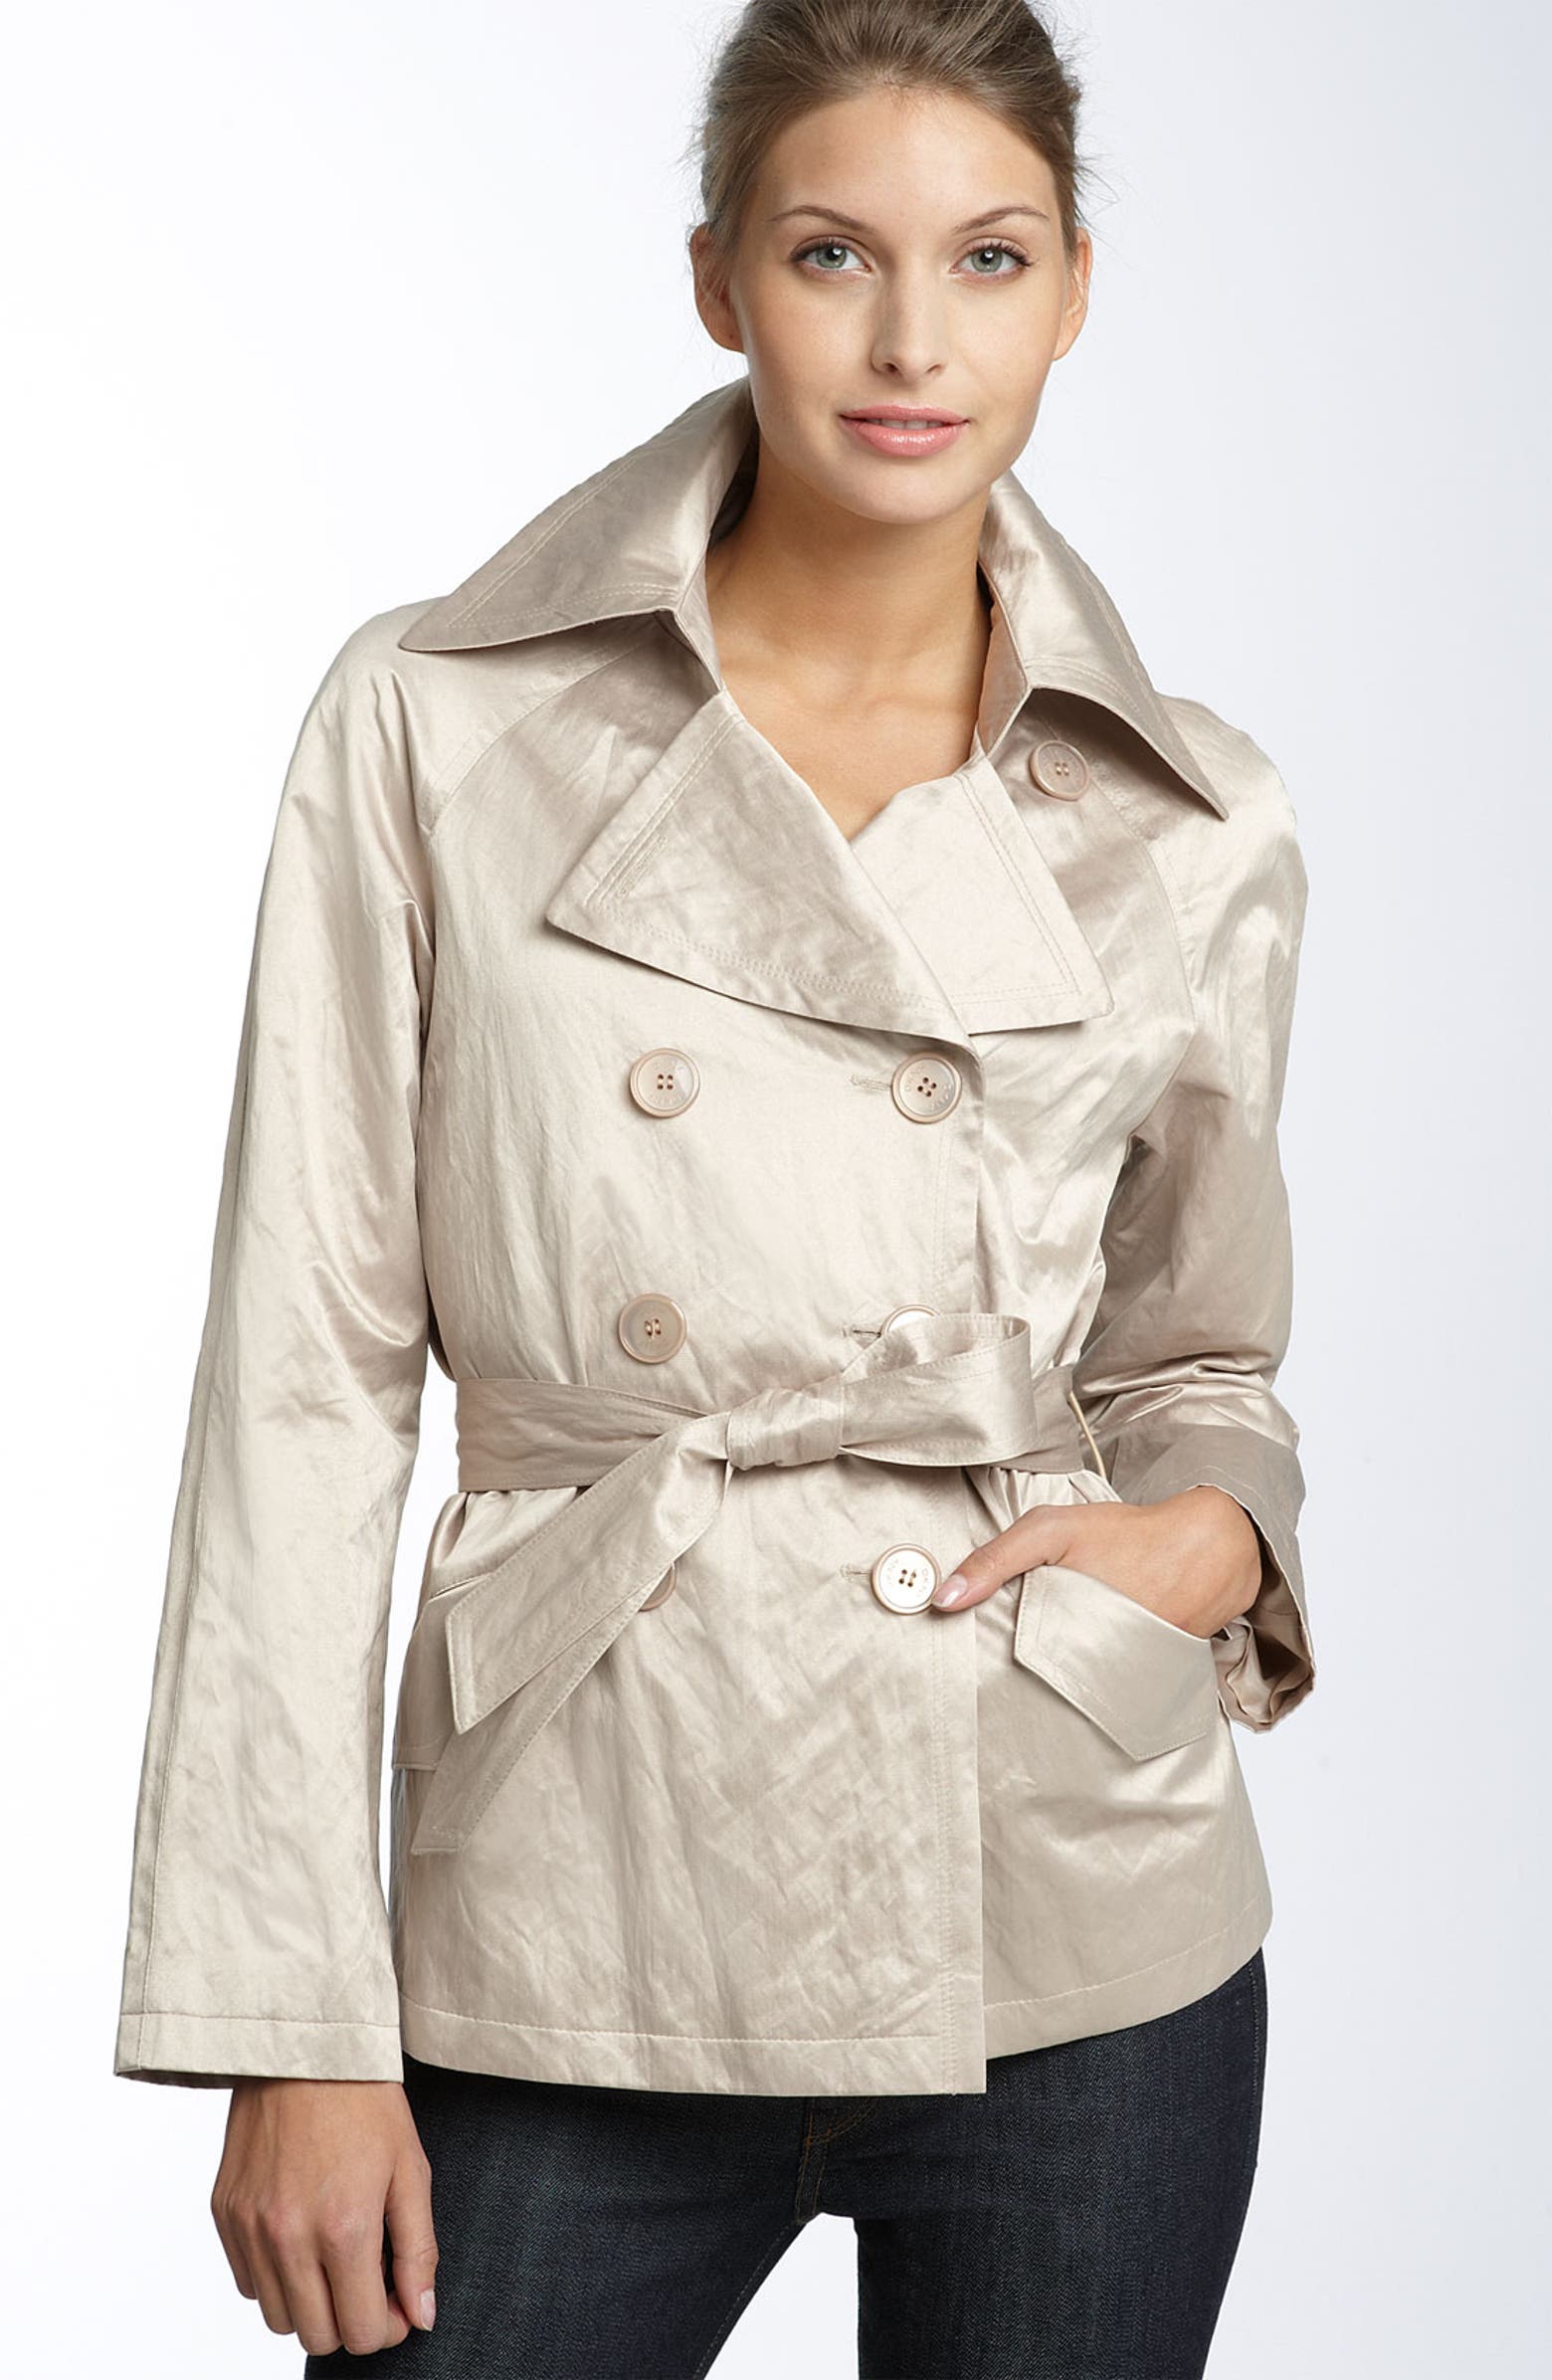 DKNY 'Piper' Crinkled Satin All Weather Short Trench Coat | Nordstrom